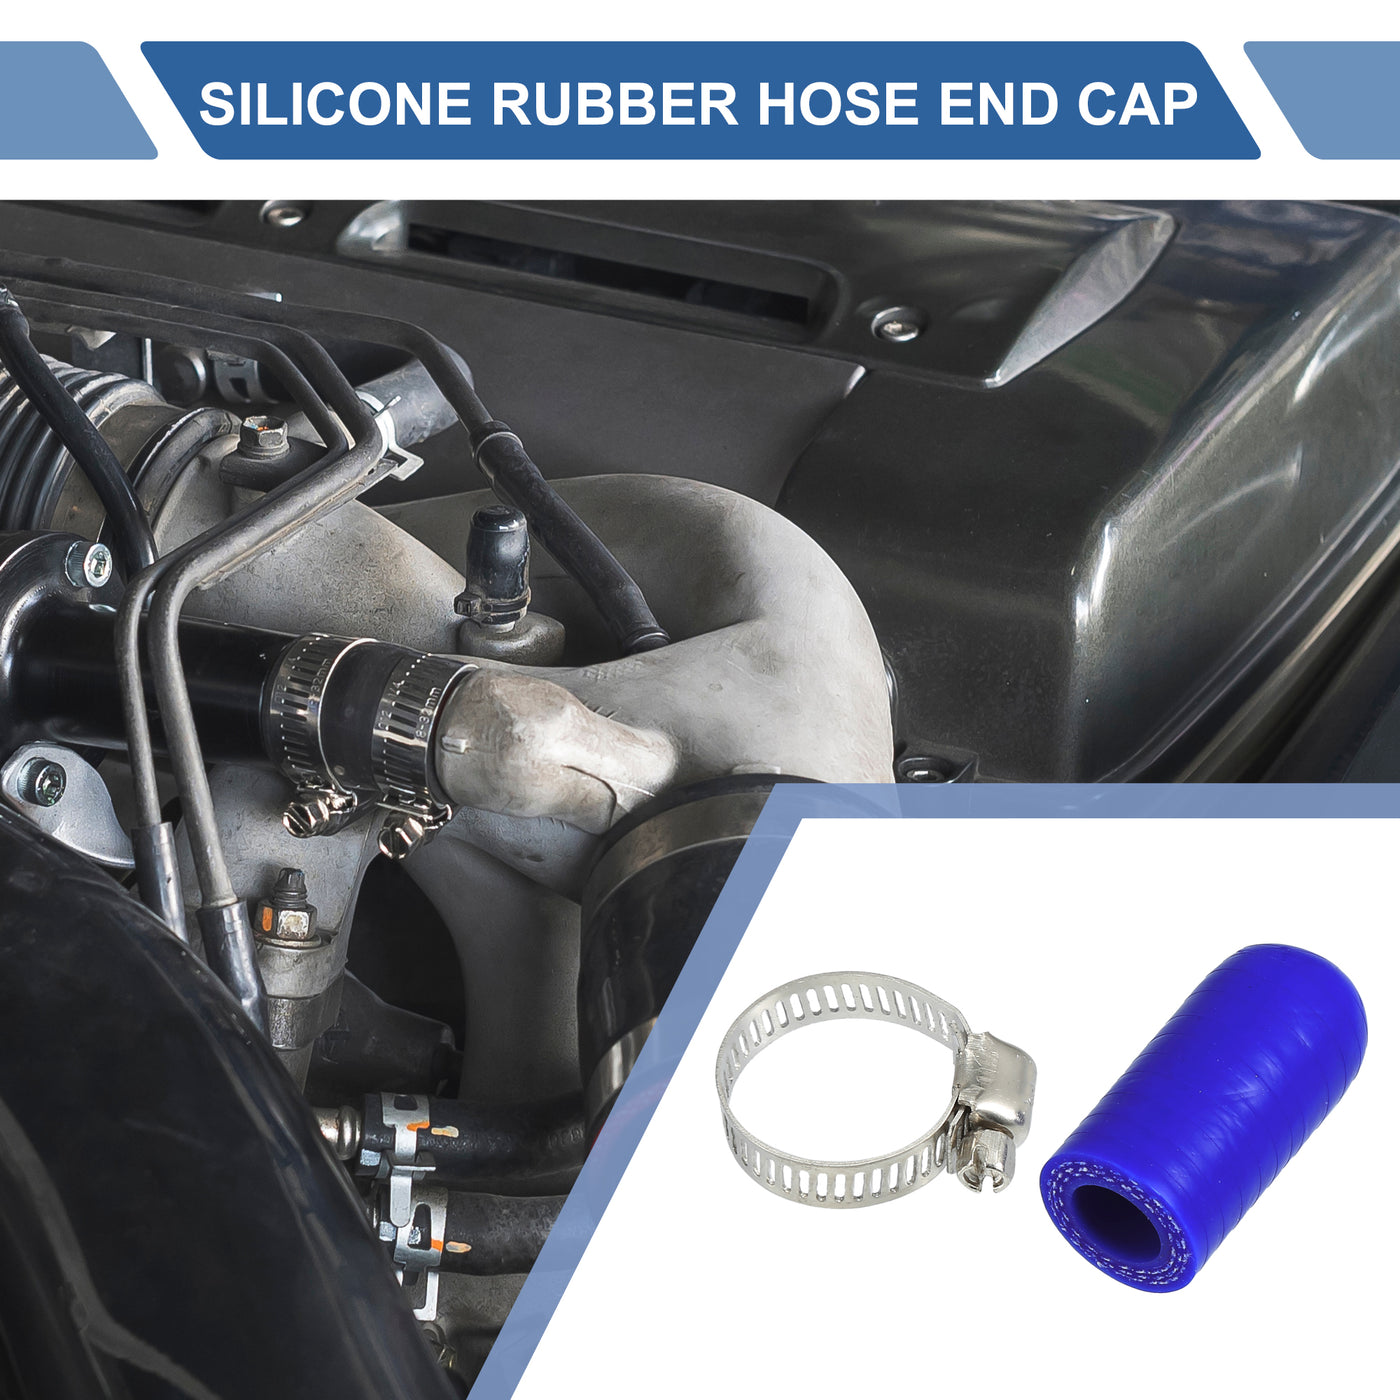 X AUTOHAUX 1 Set 30mm Length 12mm/0.47" ID Blue Car Silicone Rubber Hose End Cap with Clamps Silicone Reinforced Blanking Cap for Bypass Tube Universal